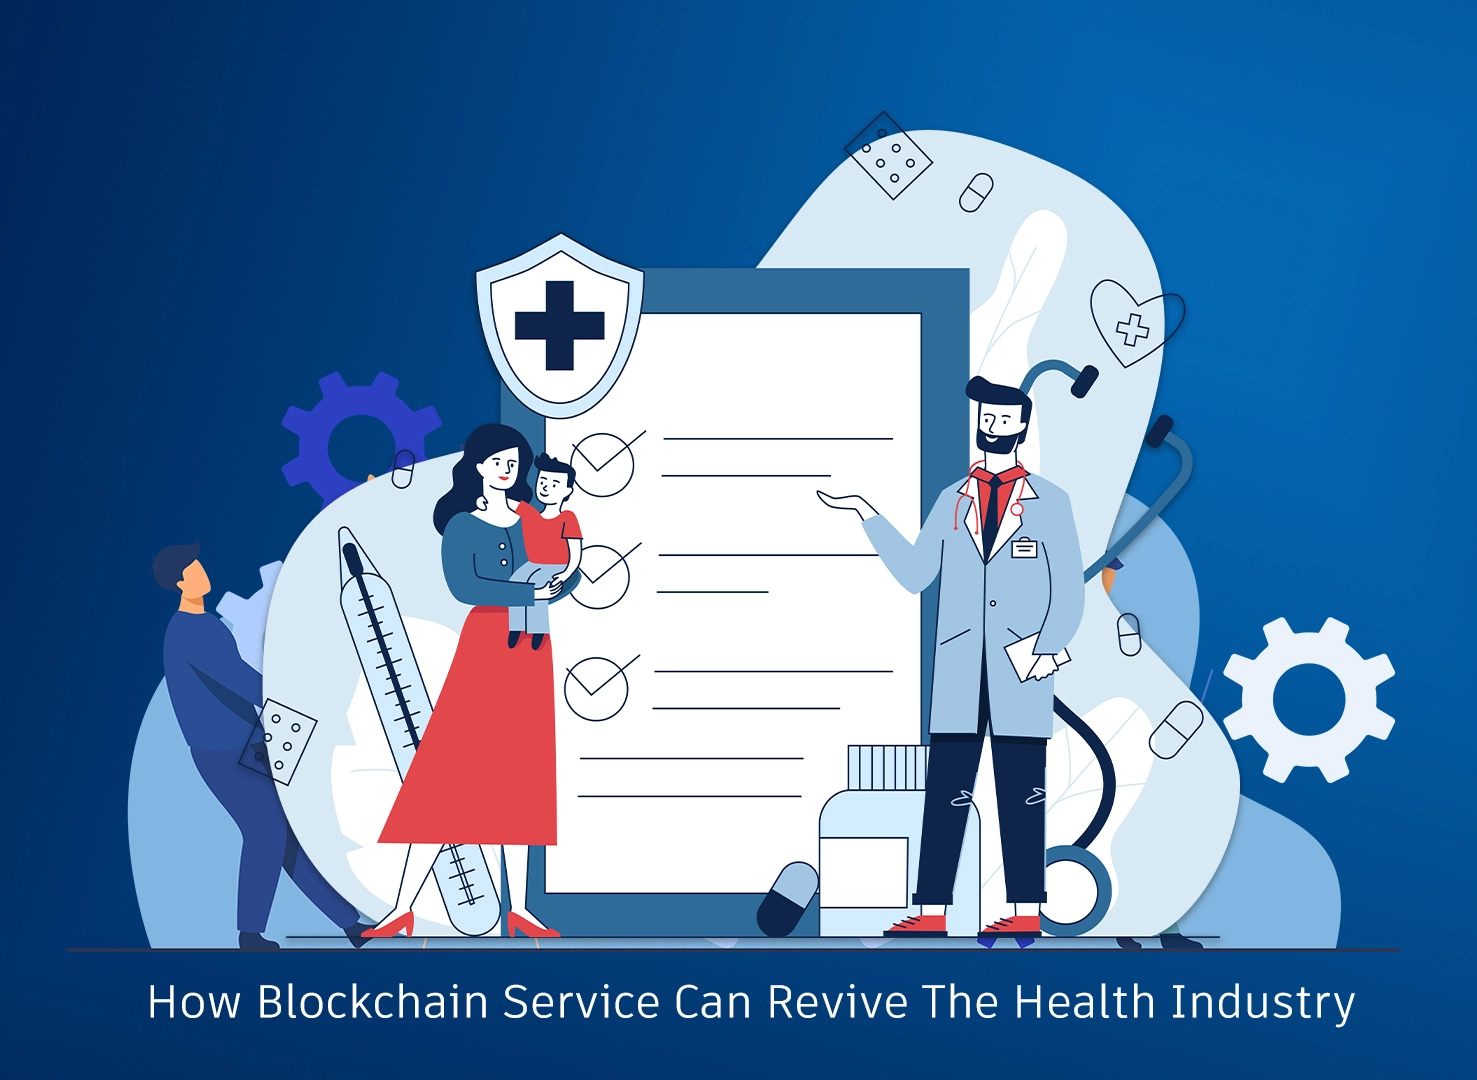 How Blockchain Service Can Revive the Health Industry